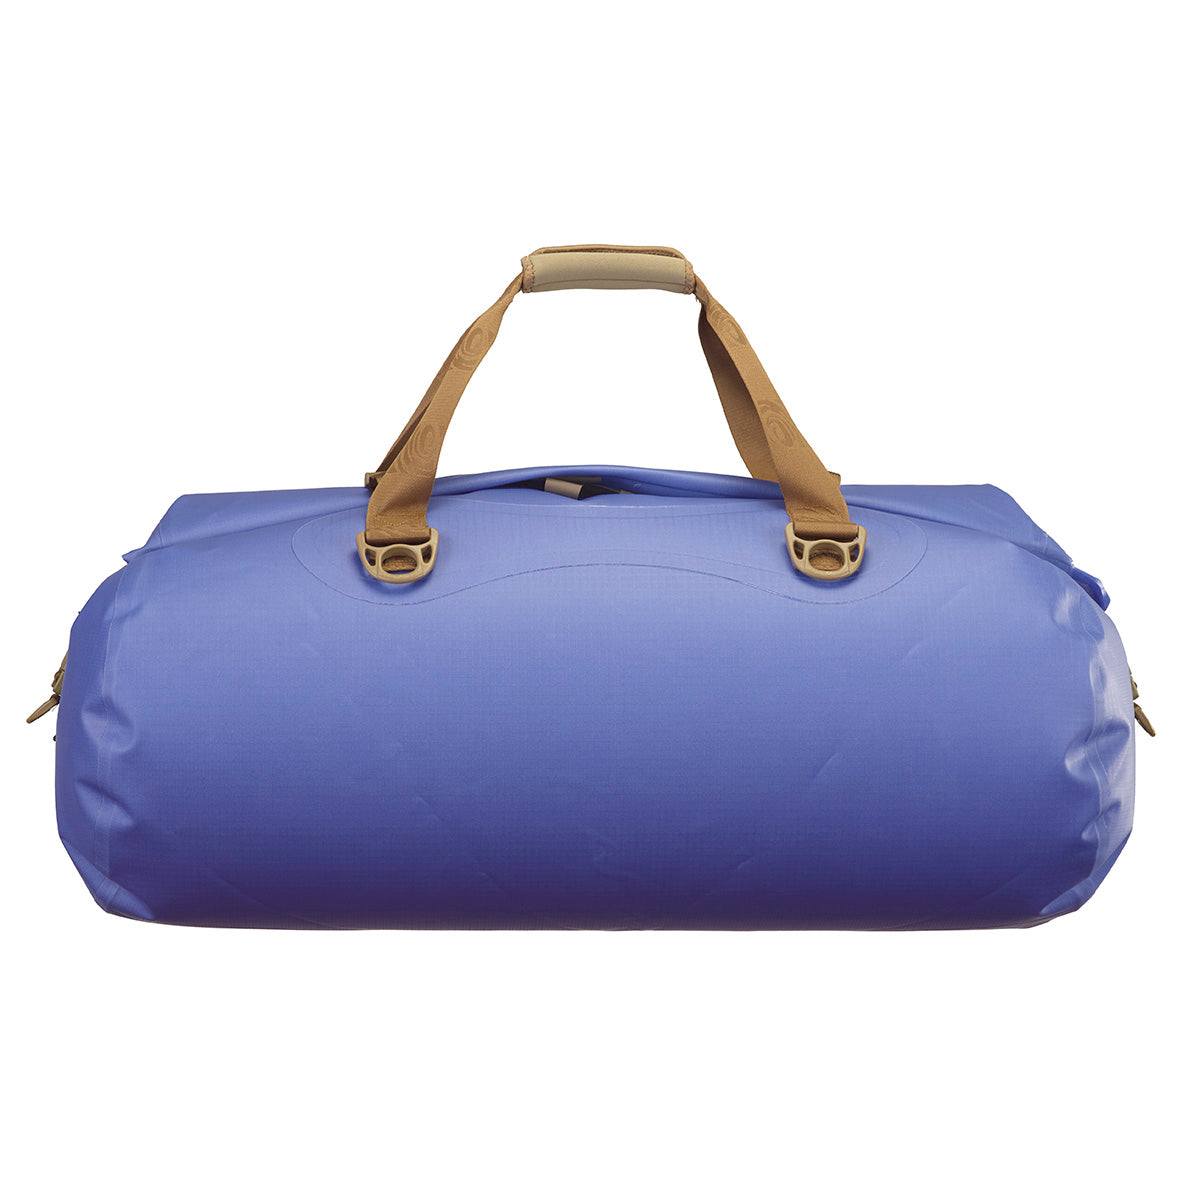 Watershed Colorado Dry Duffle